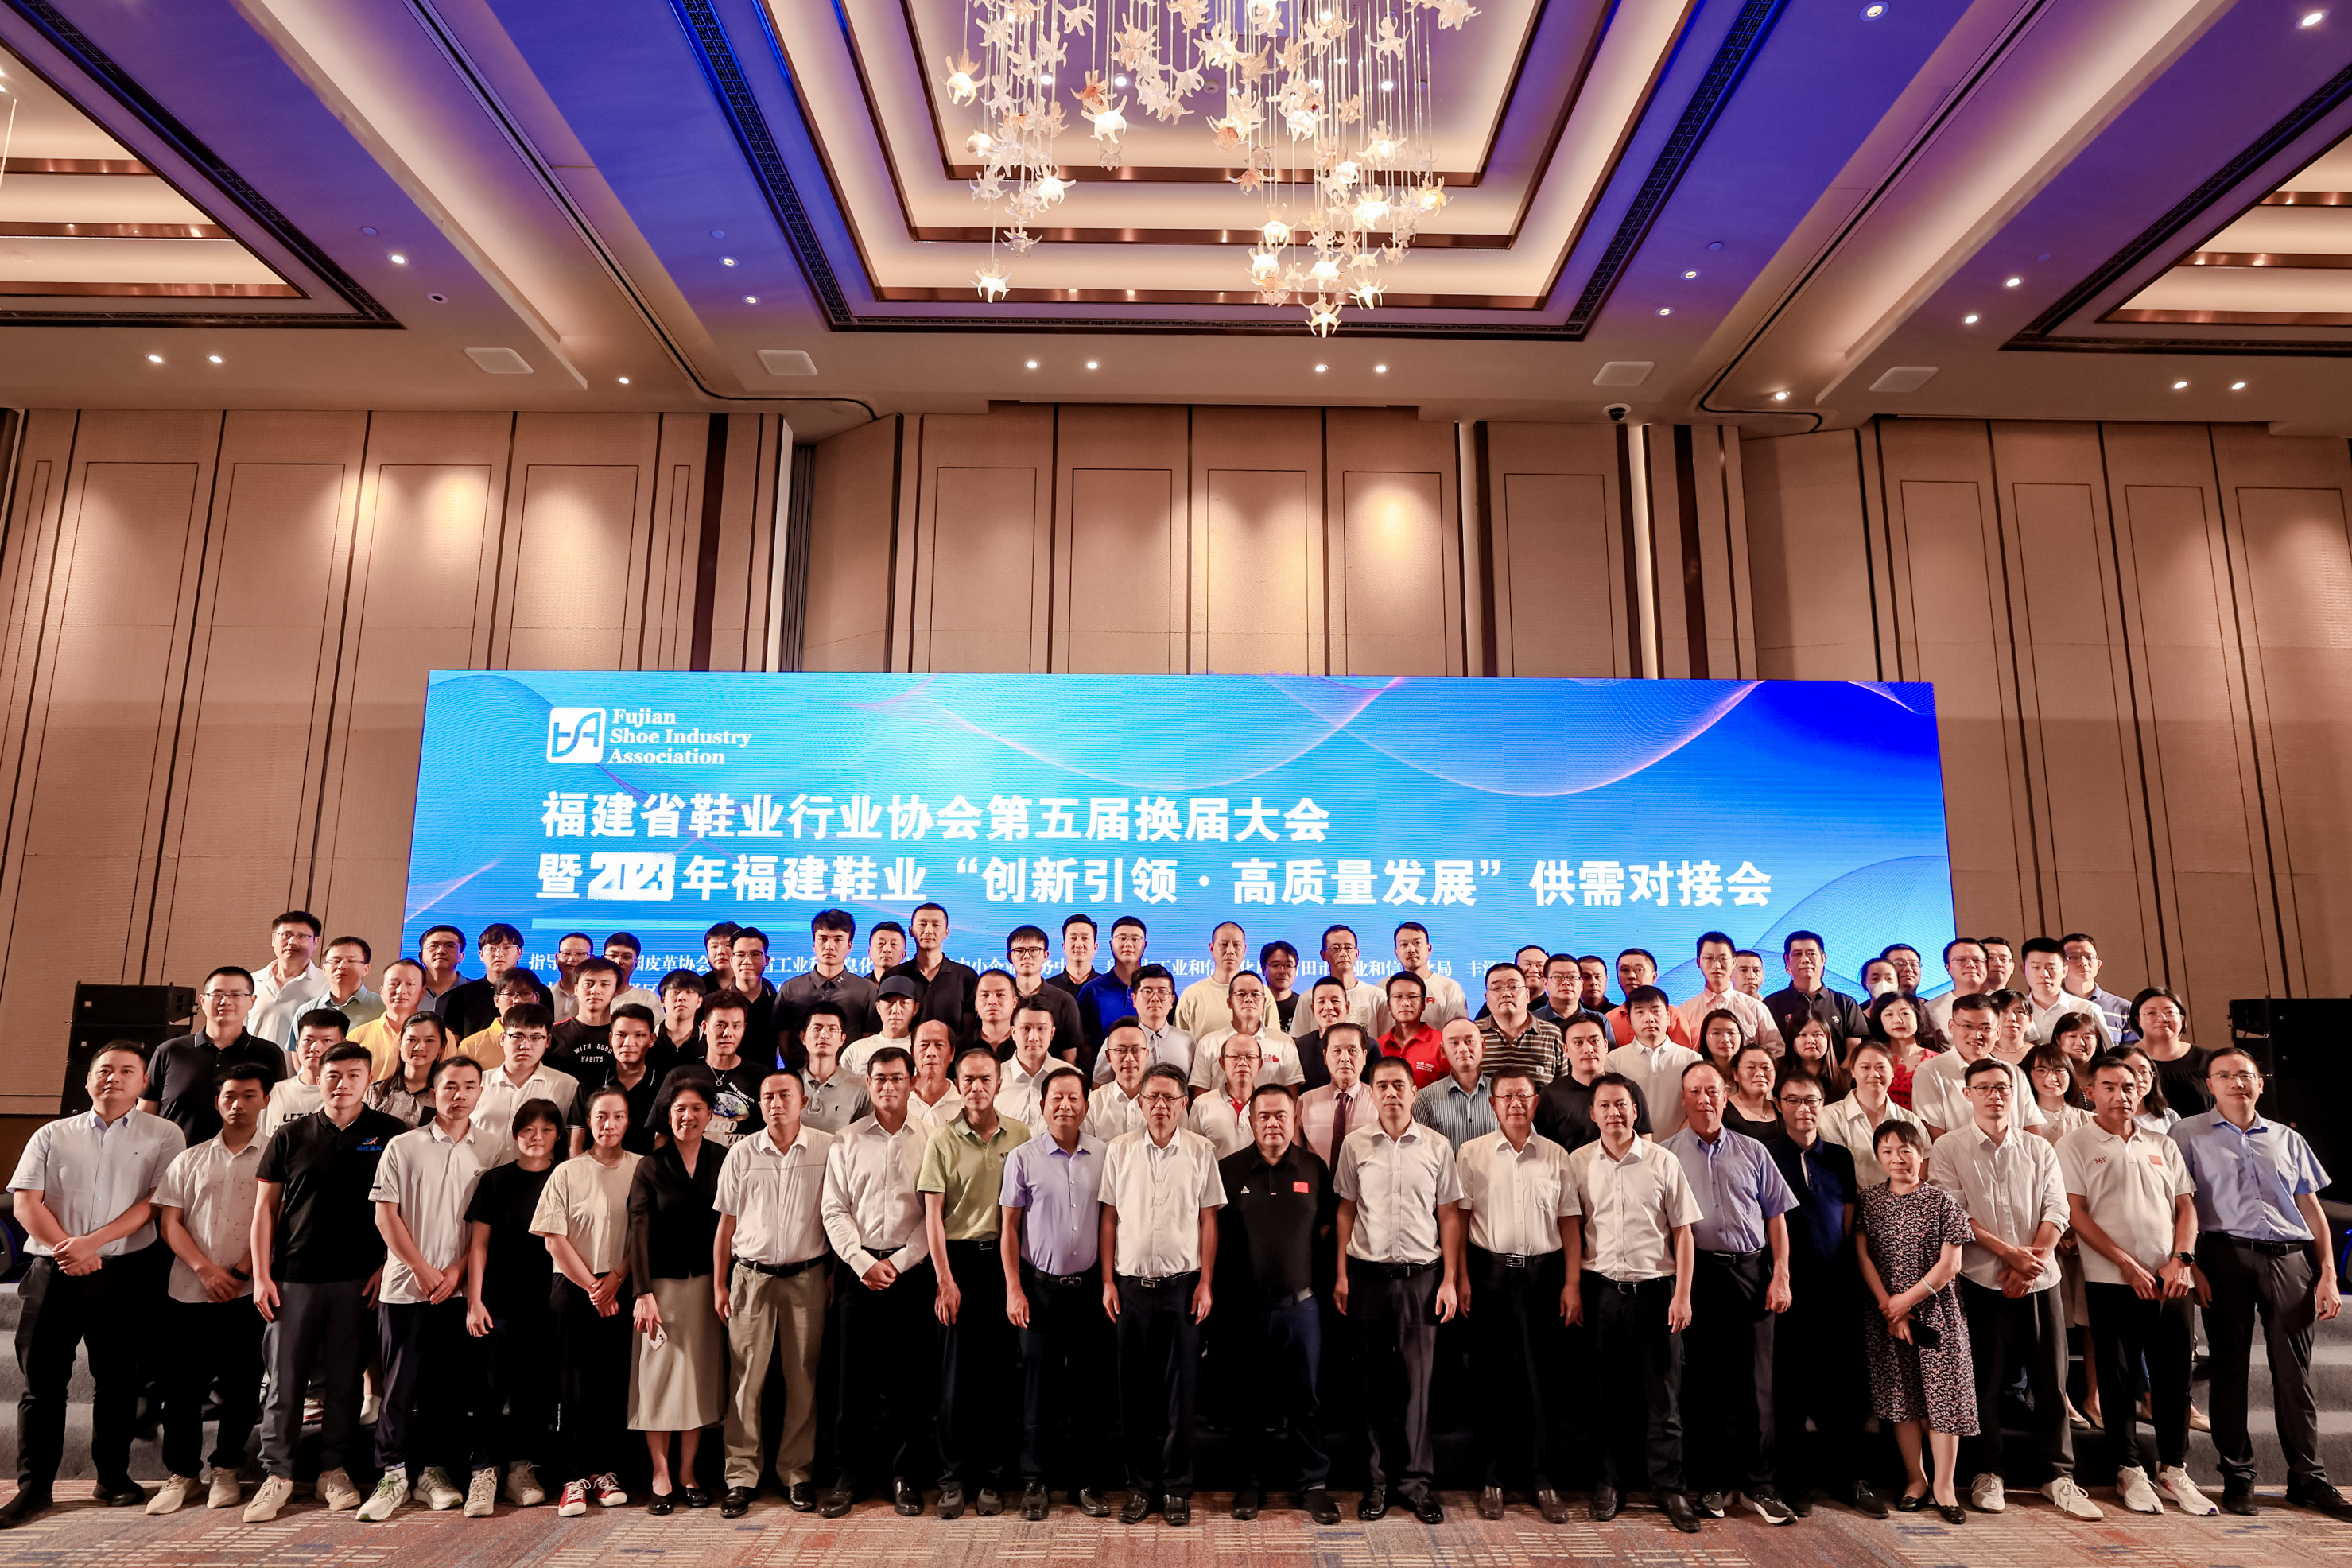 C&amp;D Light Industry Elected Executive Vice President of Fujian Footwear Industry Association